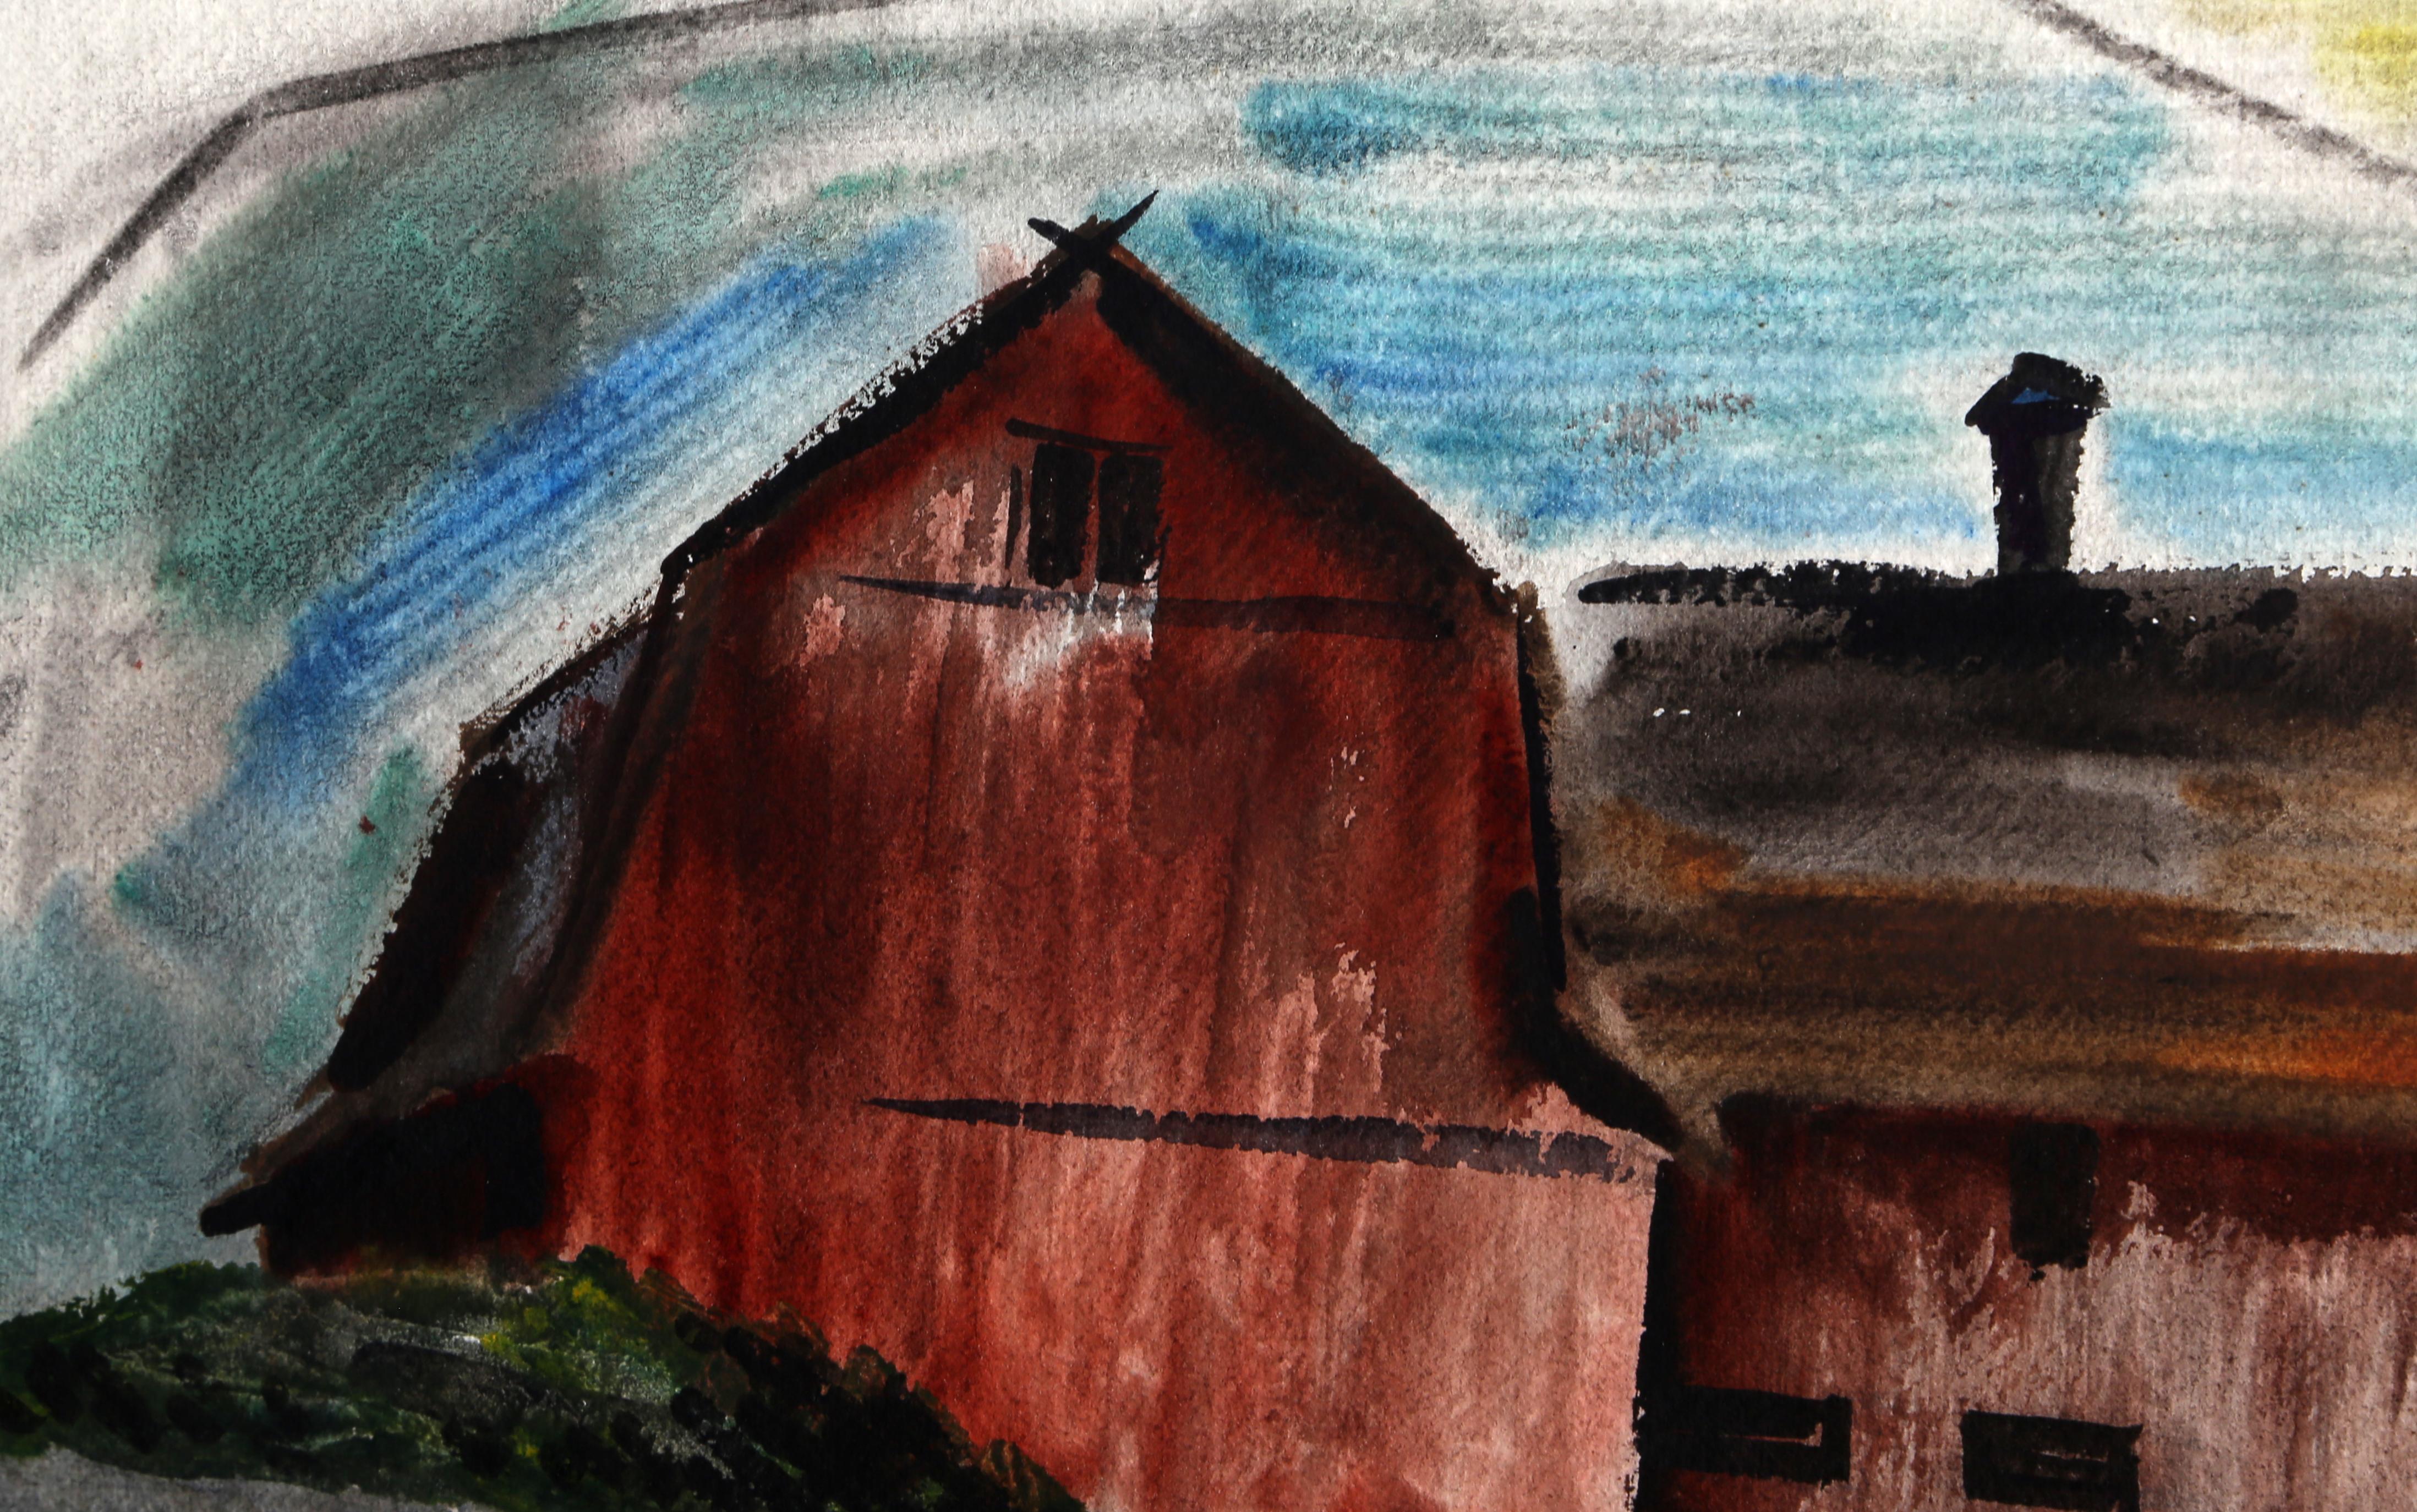 This unique work is a watercolor by American artist Chris Ritter. The painting depicts a landscape of rolling green hills with a red barn centered in the composition.

Red Barn
Chris Ritter, American (1906–1976)
Date: circa 1962
Watercolor on